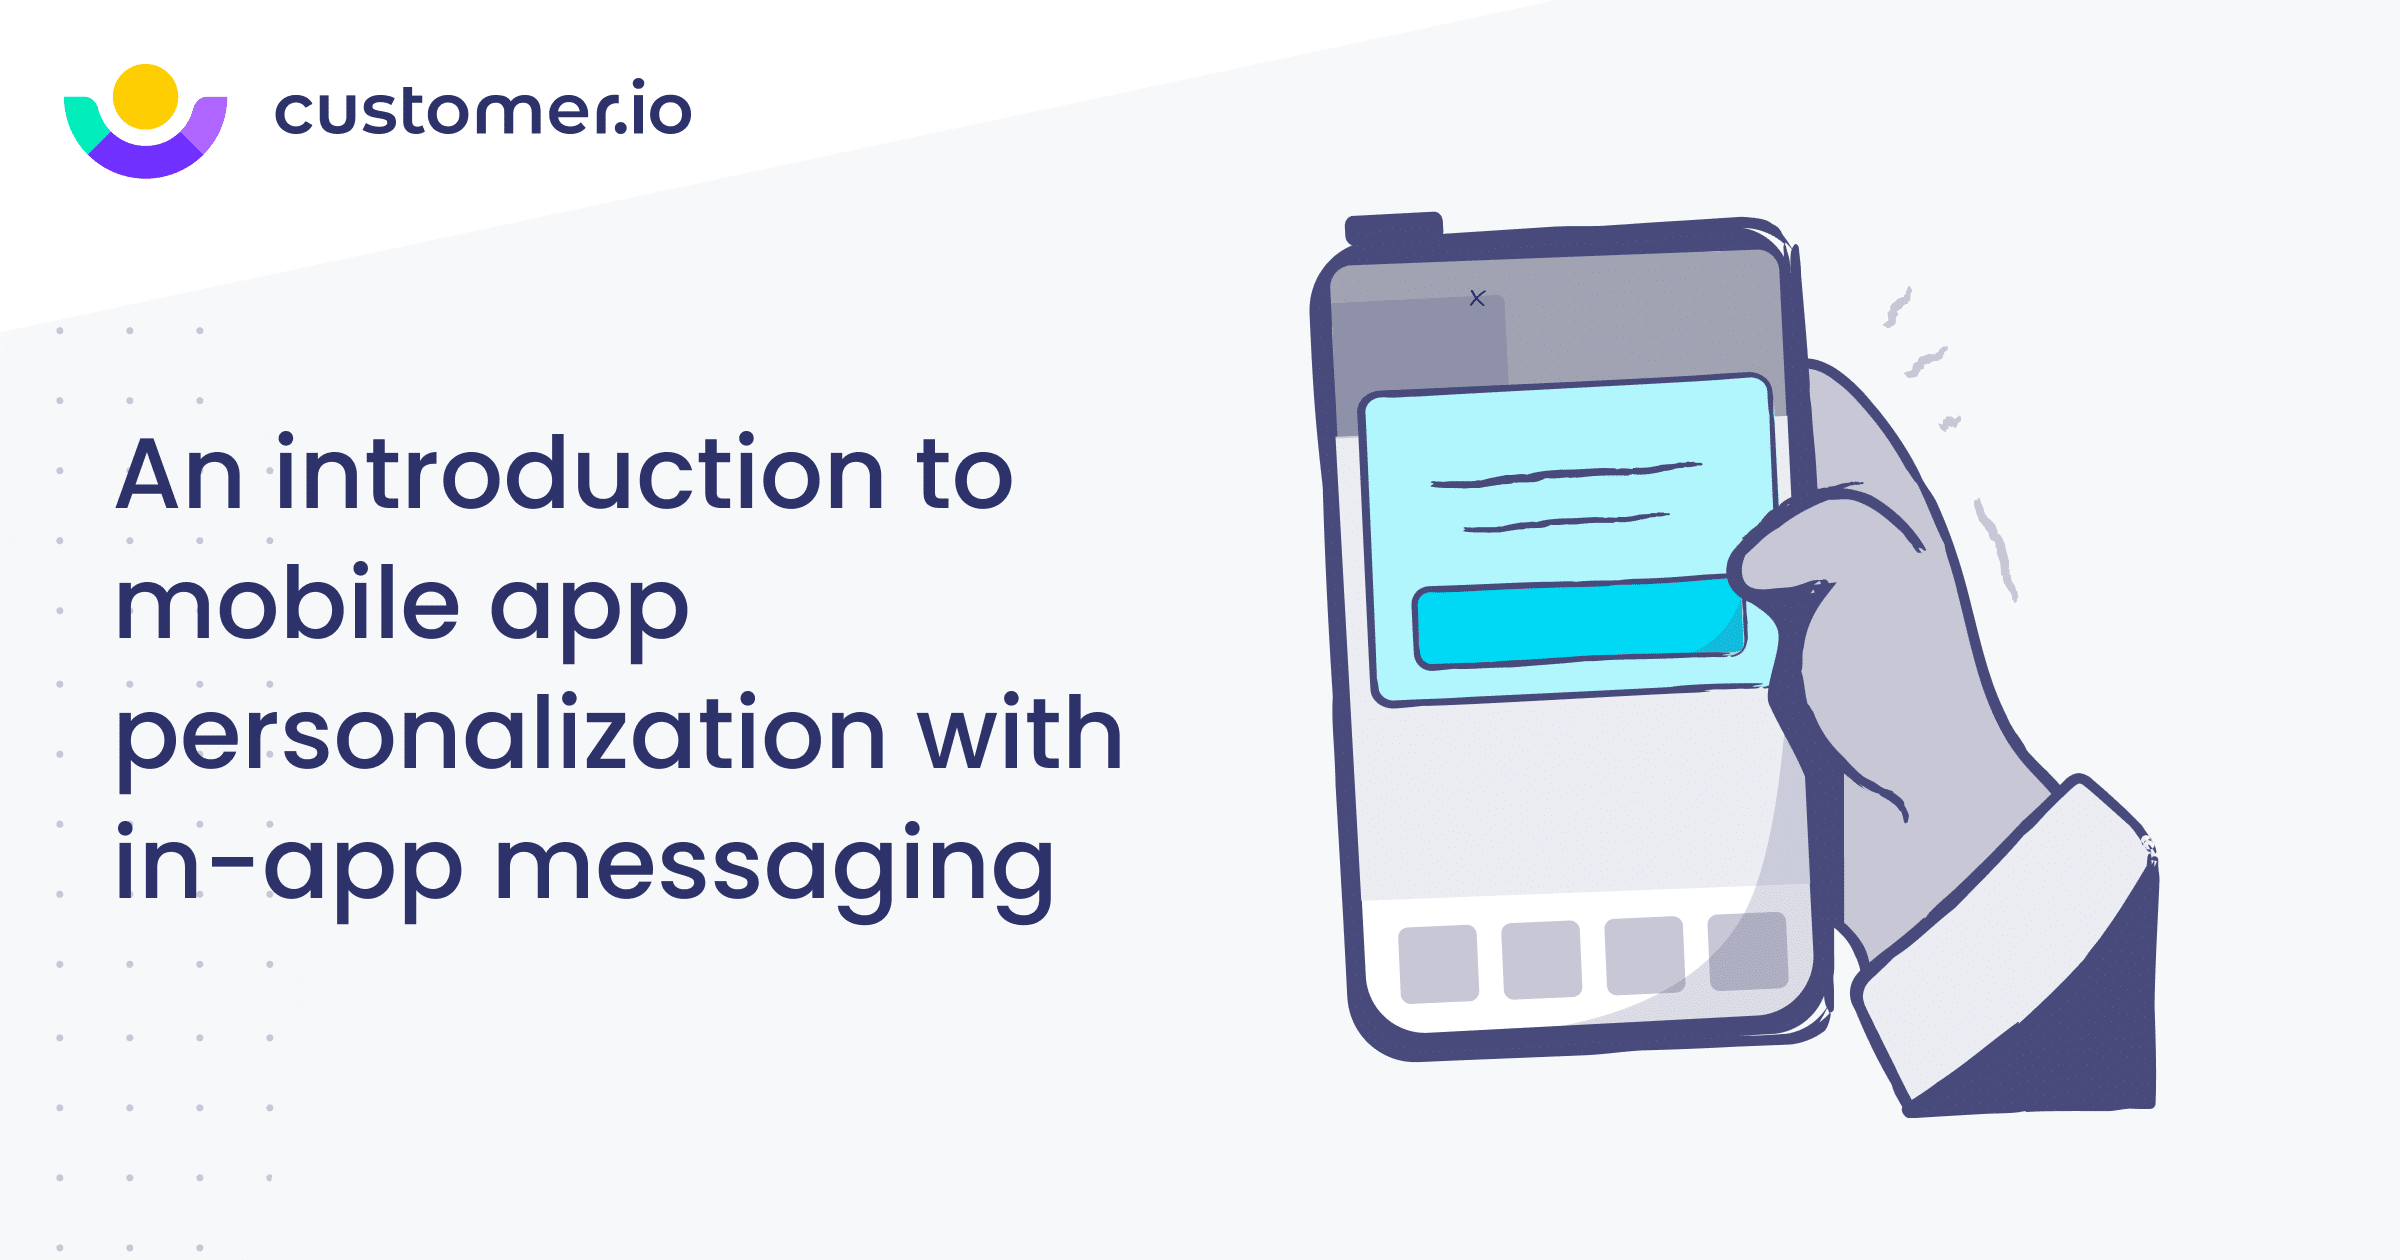 Mobile app personalization with in-app messaging